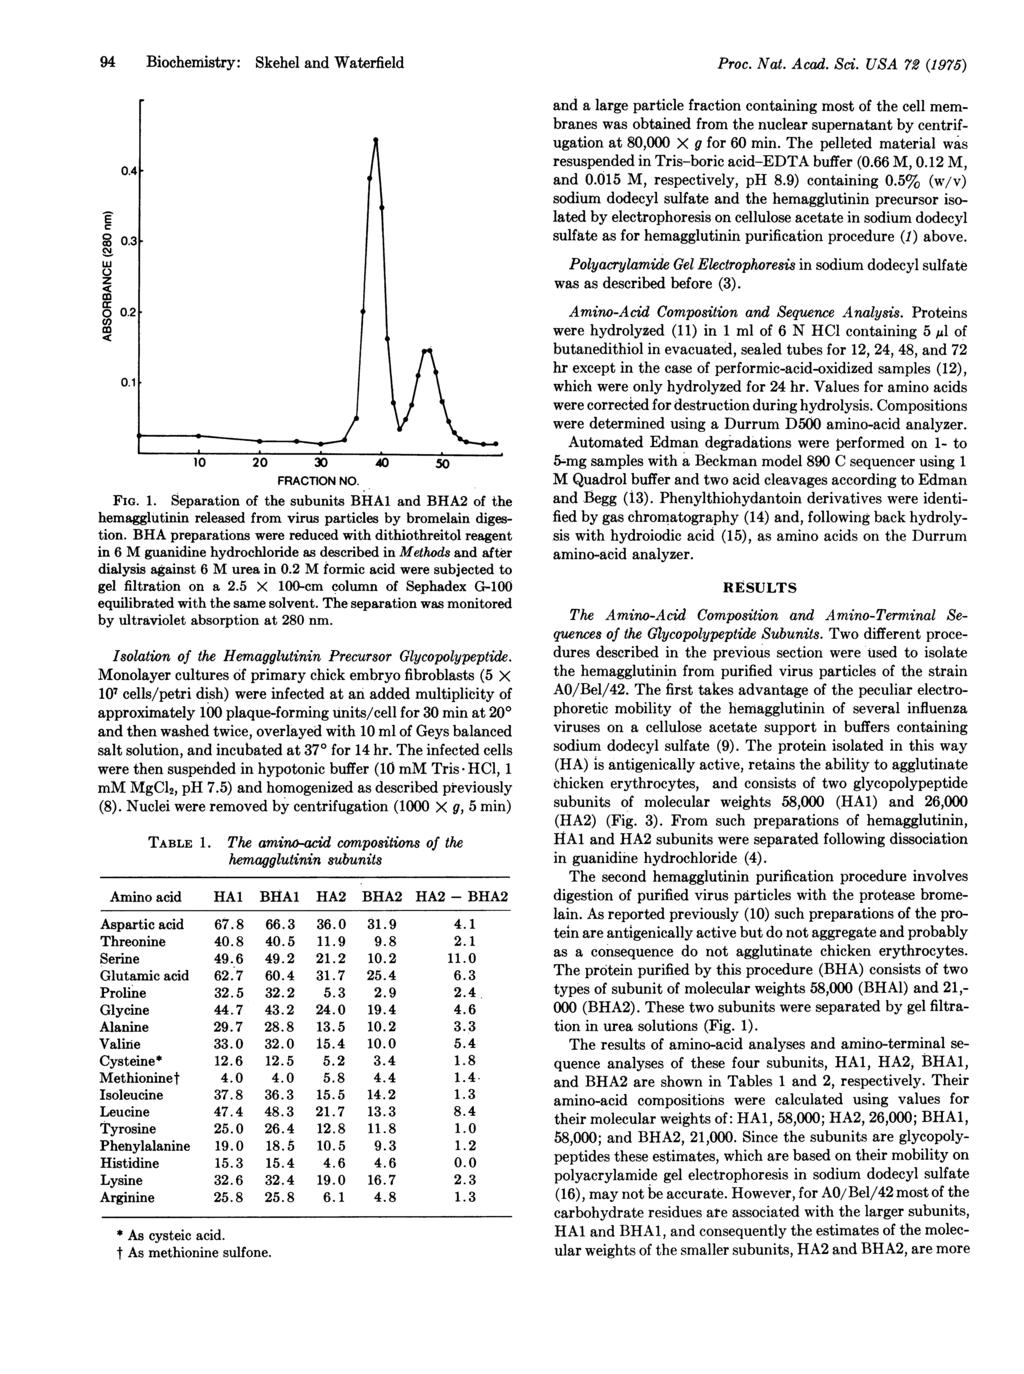 94 Biochemistry: Skehel and Waterfield C 8 0.3 - co0. CD) 0.1 10 20 30 40 50 FRACTION NO. FIG. 1. Separation of the subunits BHA1 and BHA2 of the hemagglutinin released from virus particles by bromelain digestion.